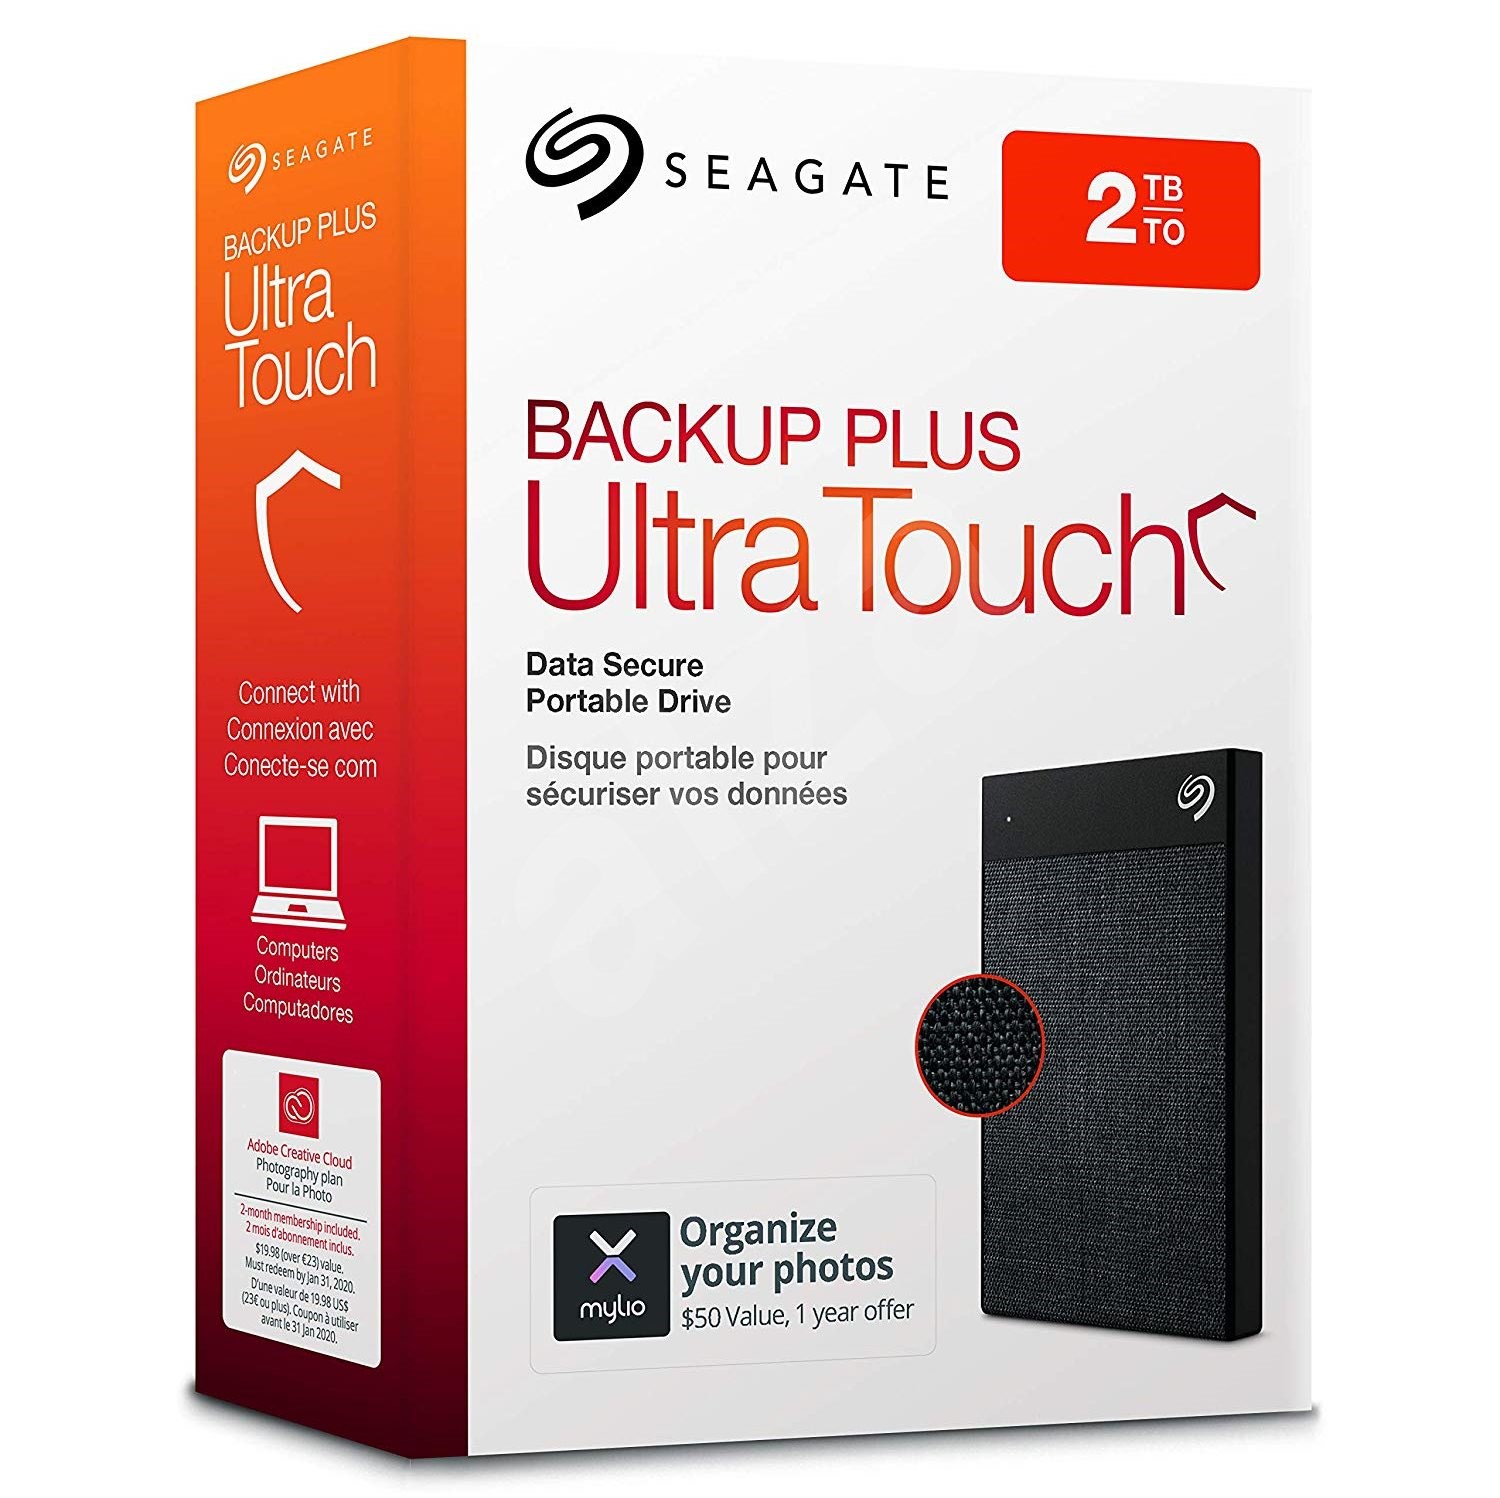 seagate backup plus ultra touch 2tb